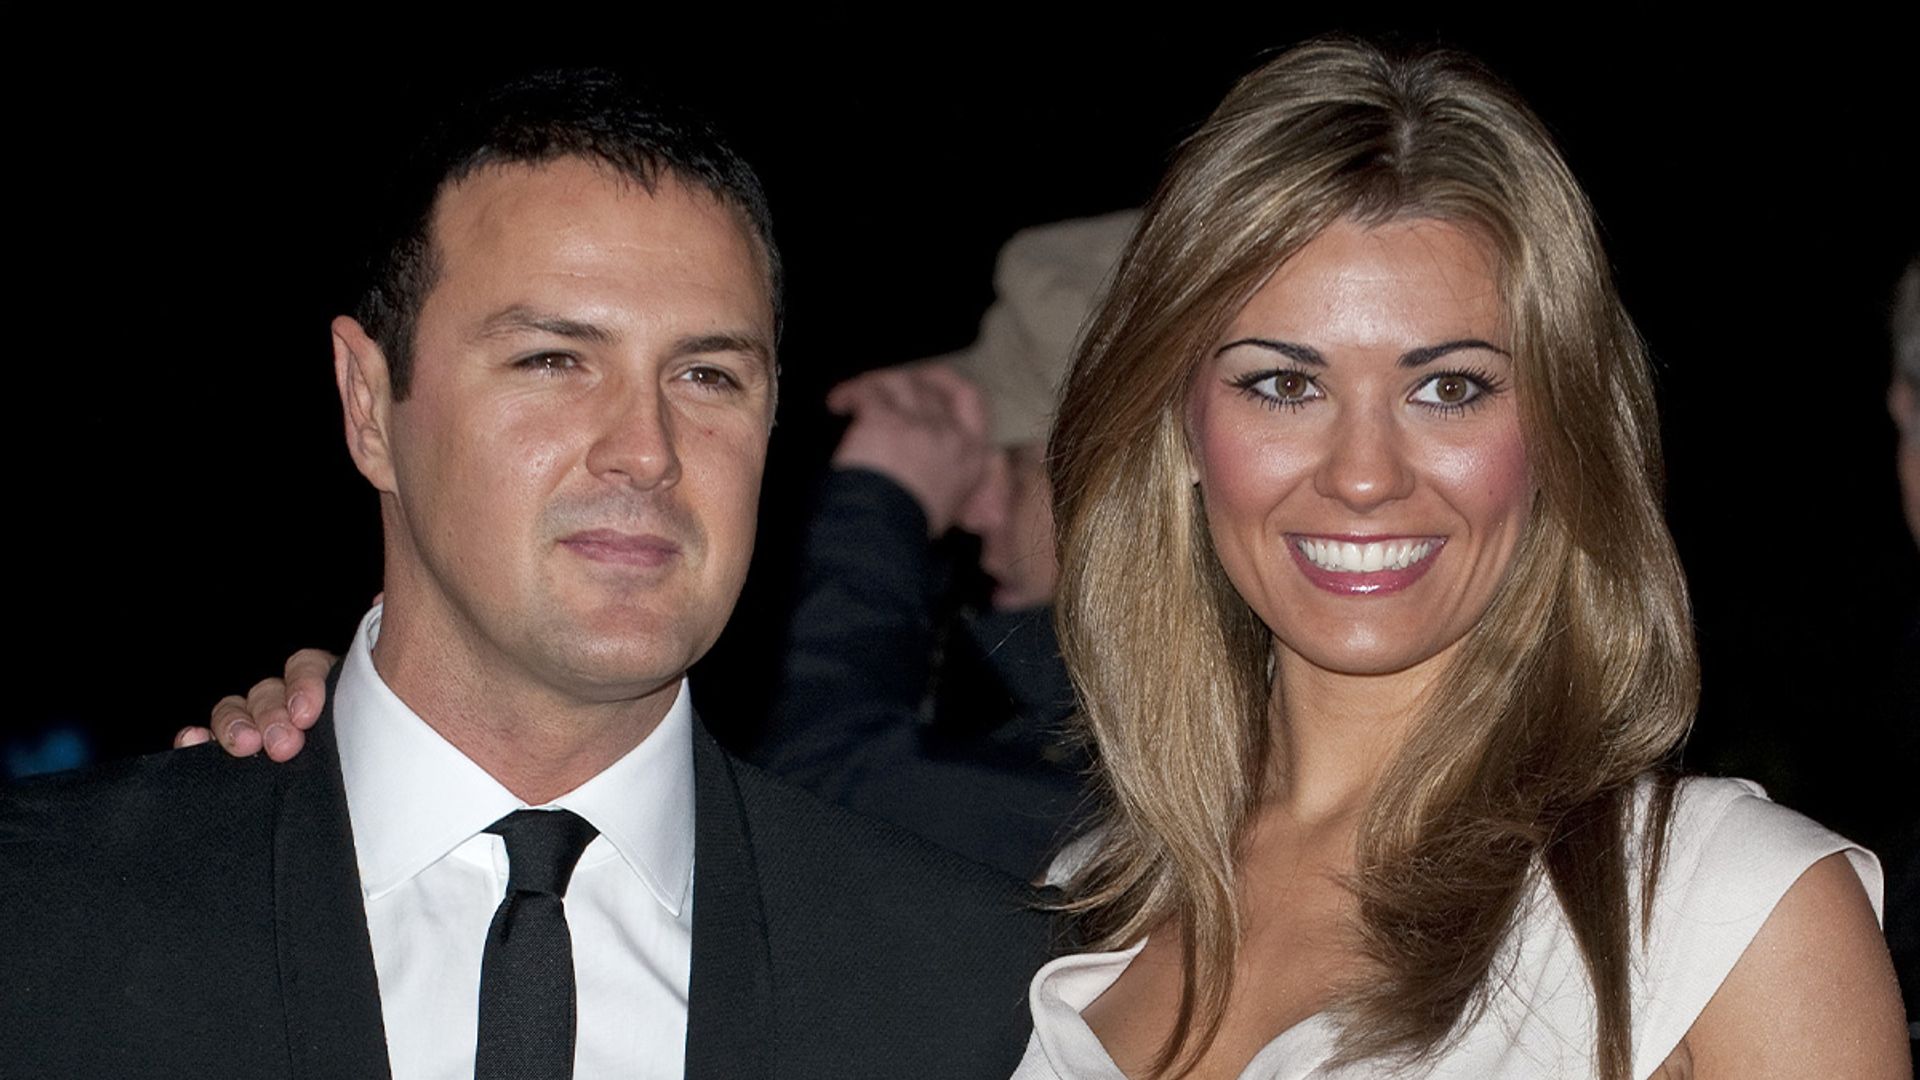 Paddy and Christine McGuinness' heartbreaking wedding day moment revealed